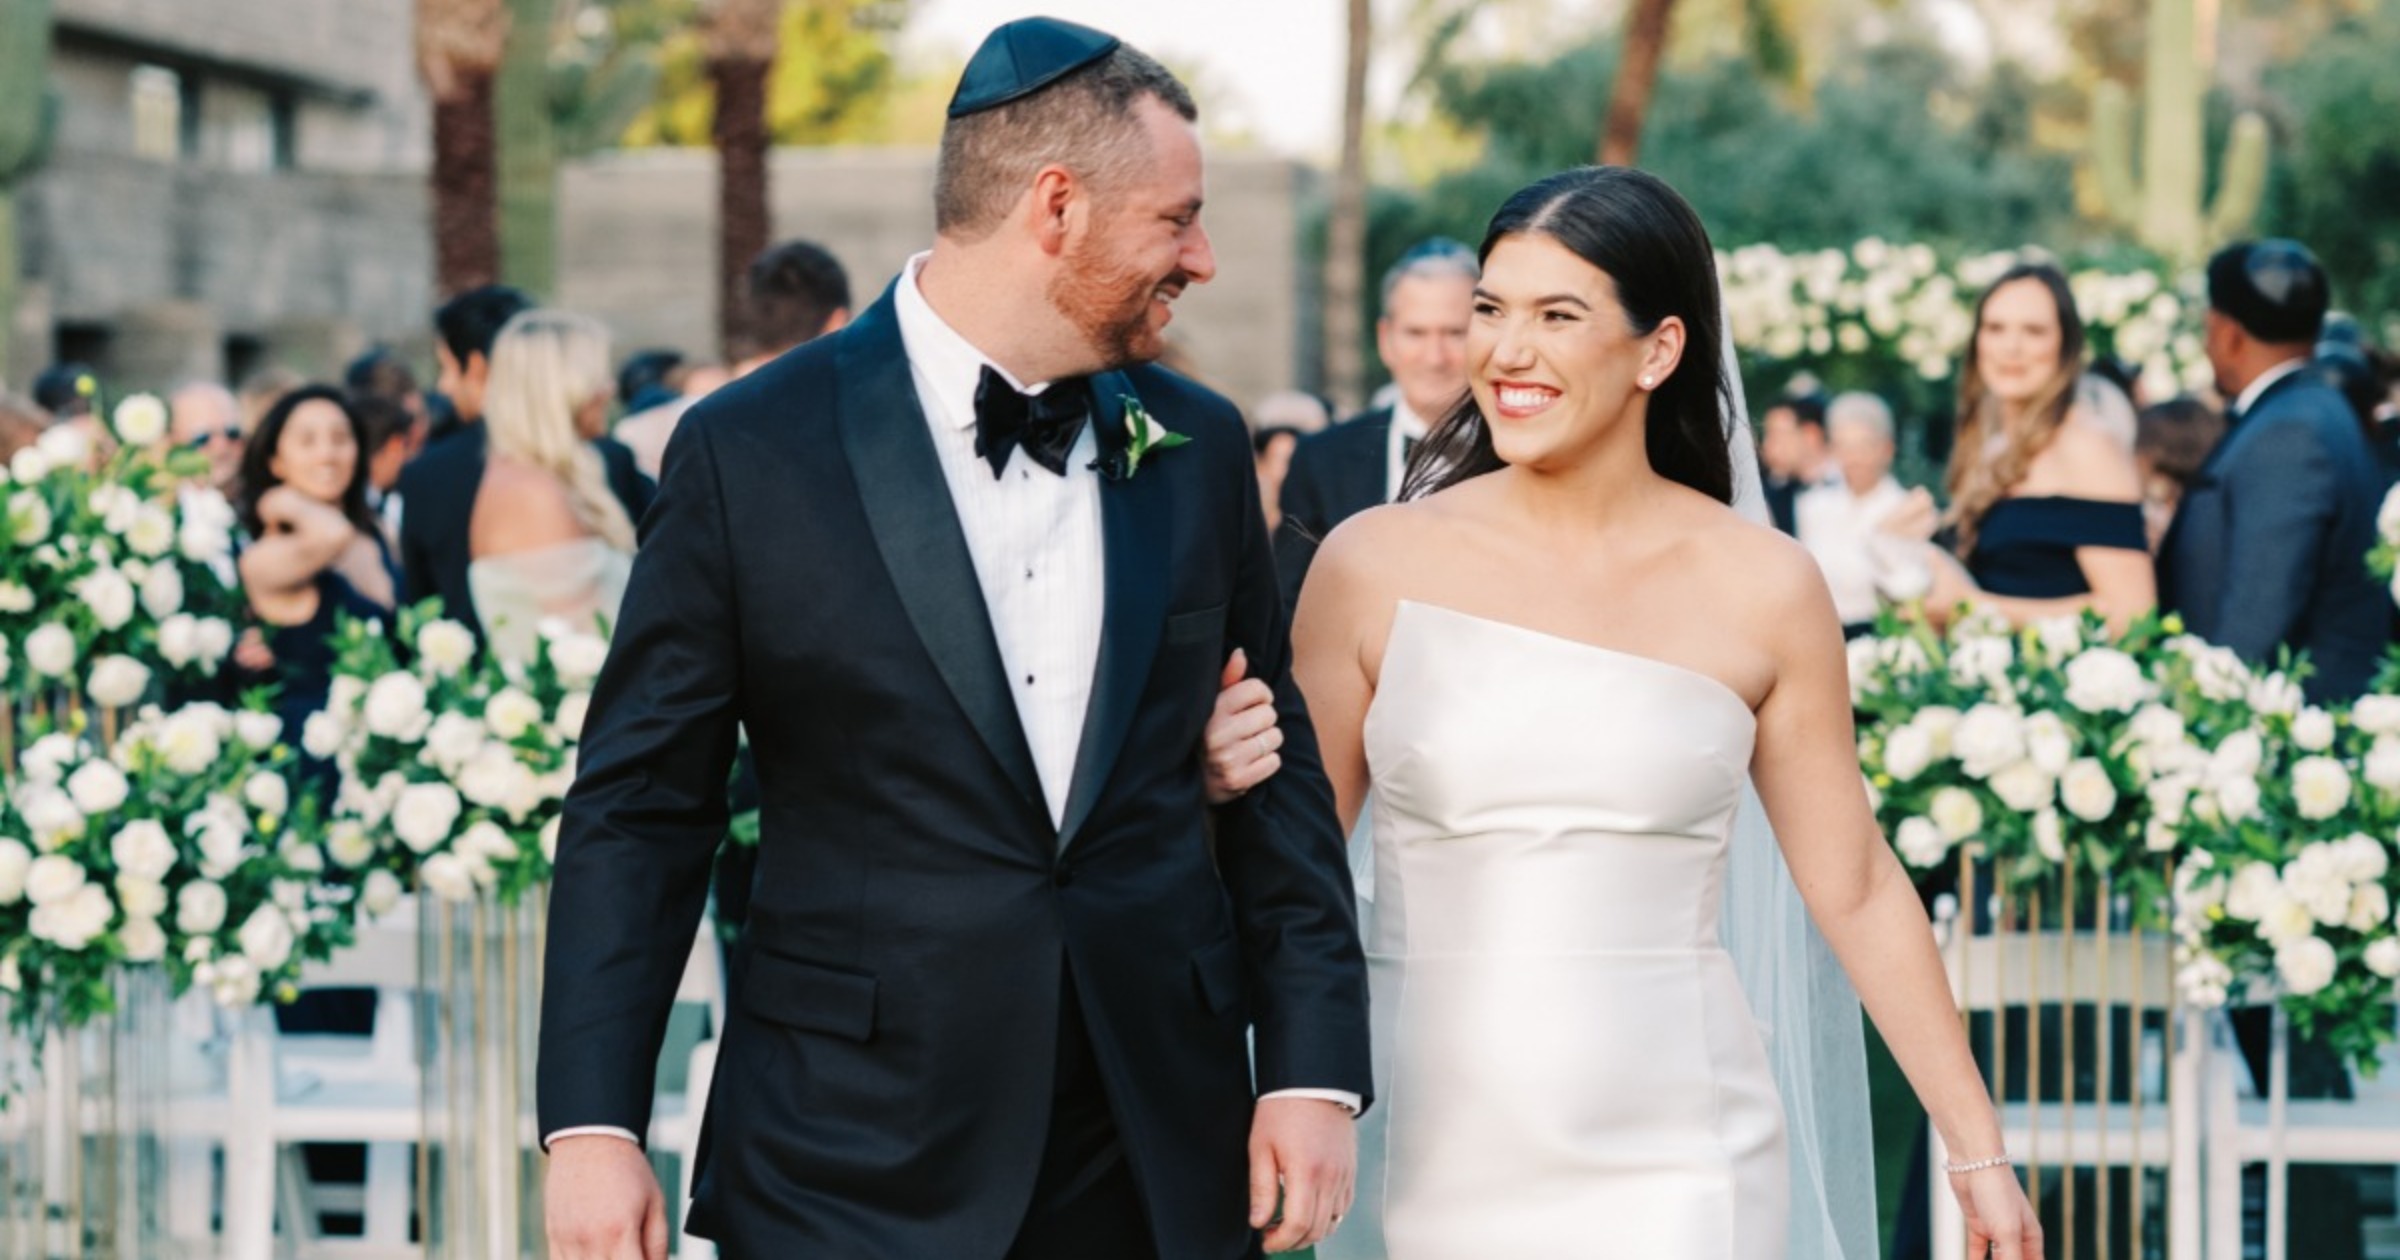 This couple got married among the flowers at the Arizona Biltmore